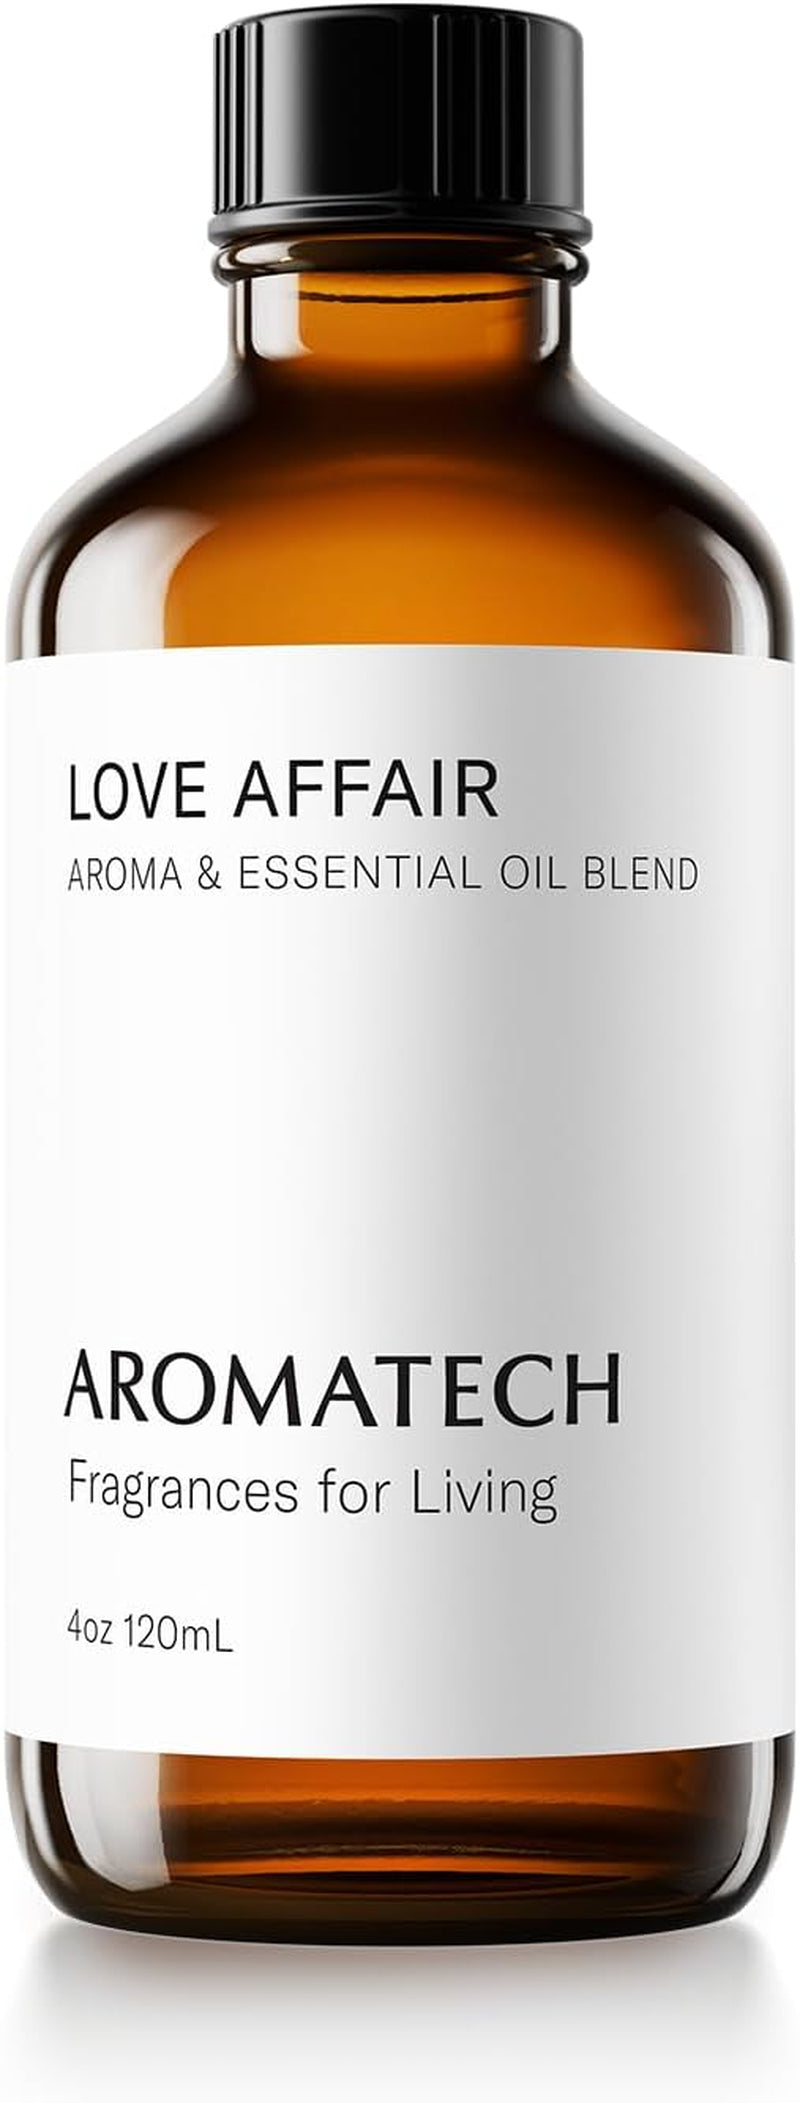 Love Affair Aroma Essential Oil Blend Stocking Stuffers, Aromatherapy Diffuser Oil, Holiday Gifts with Jasmine, Saffron & Cedarwood for Diffuser, Humidifier - 4 Fl Oz, 120 Ml